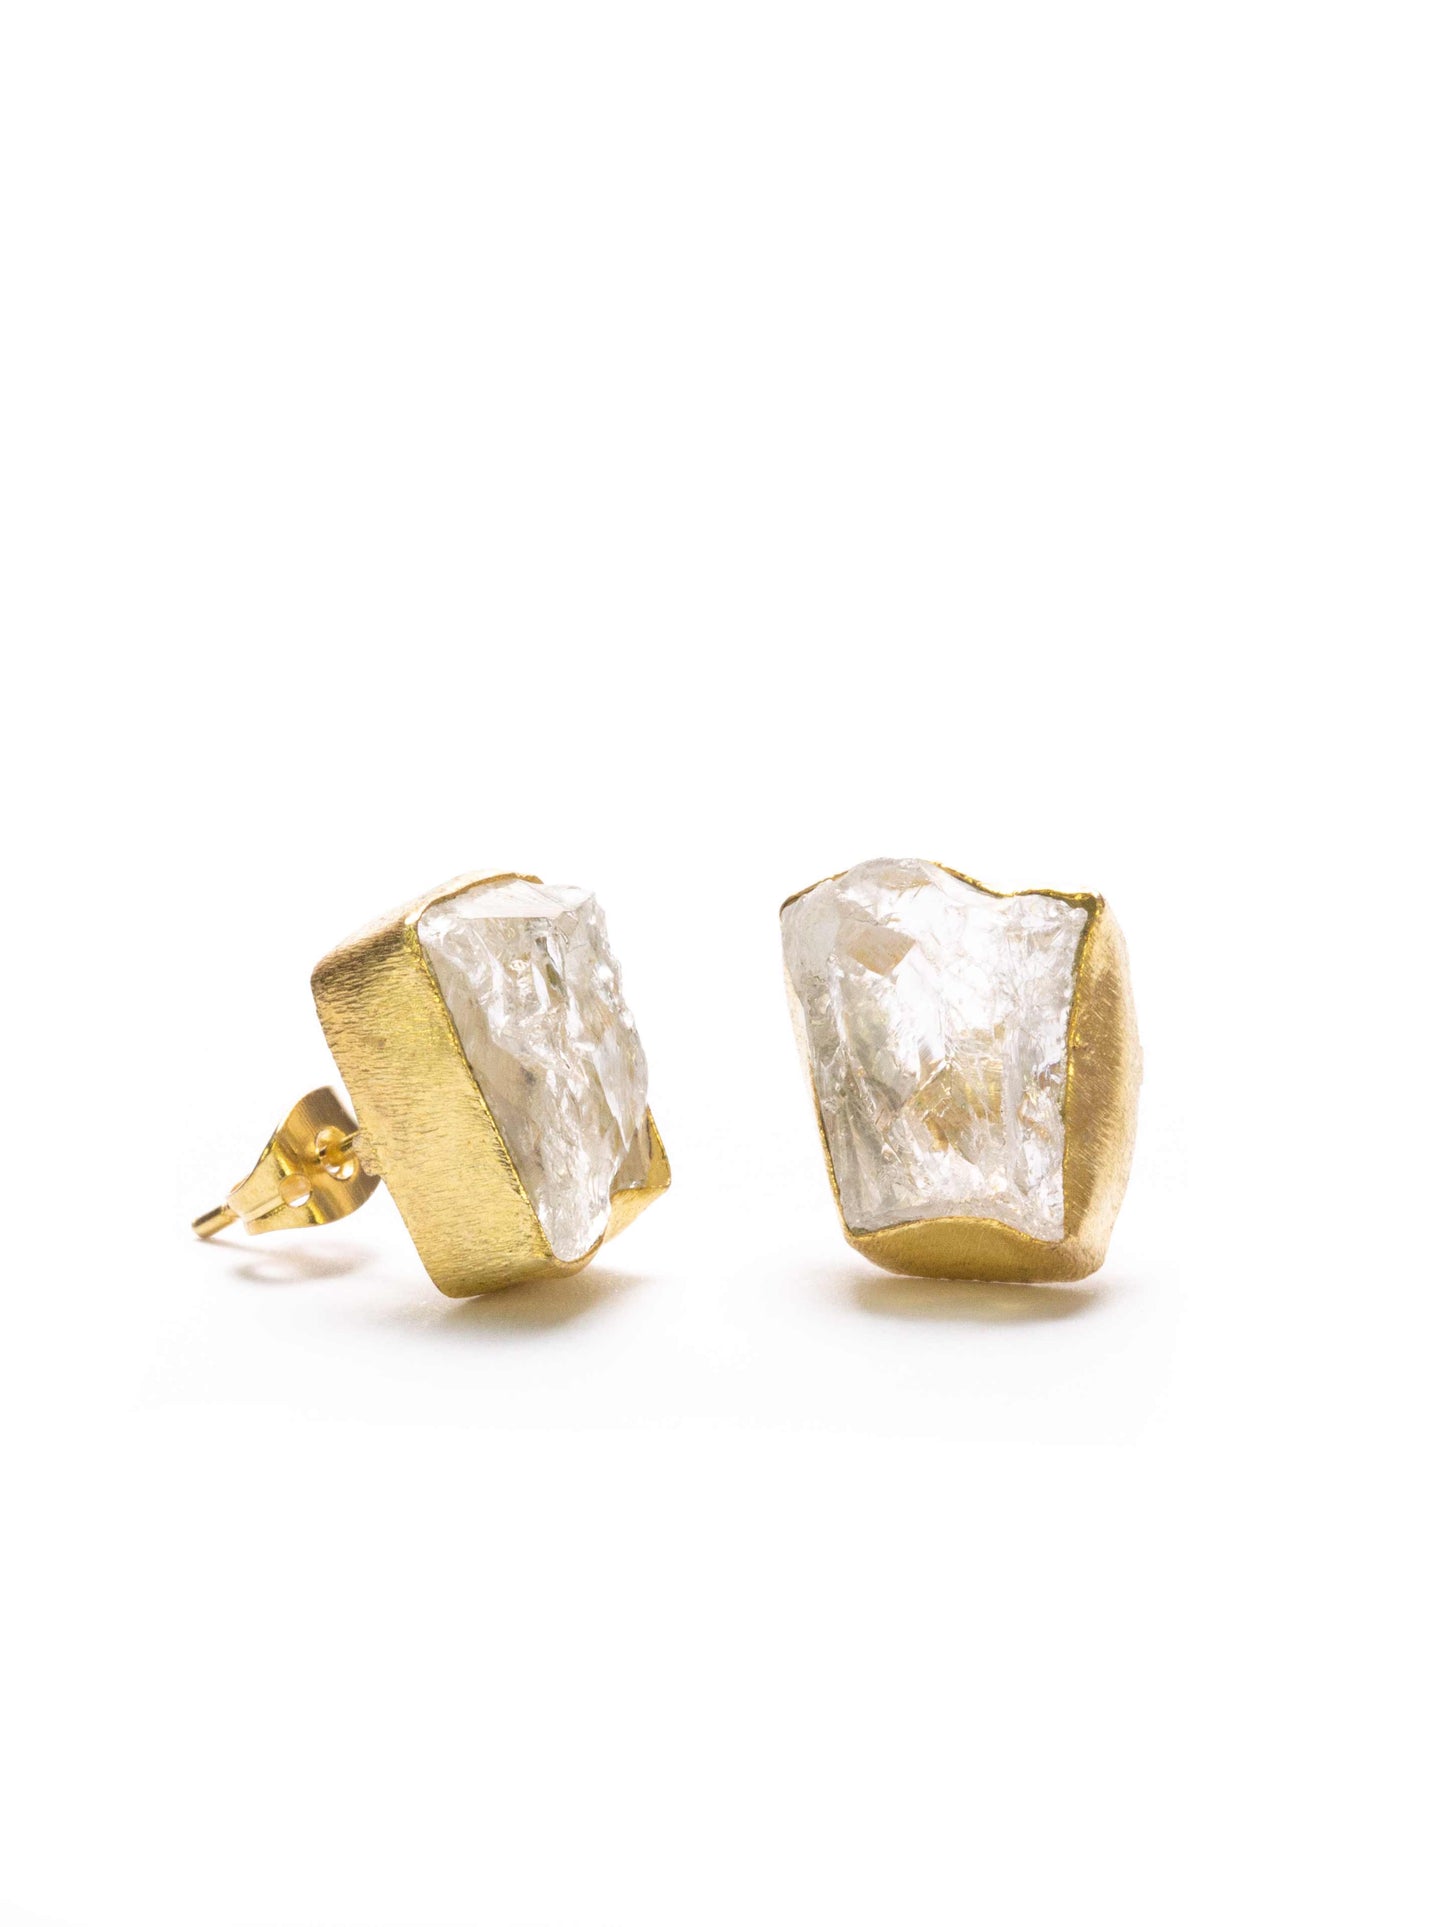 Gold Luxe earrings  - studs with raw cut crystals set in gold